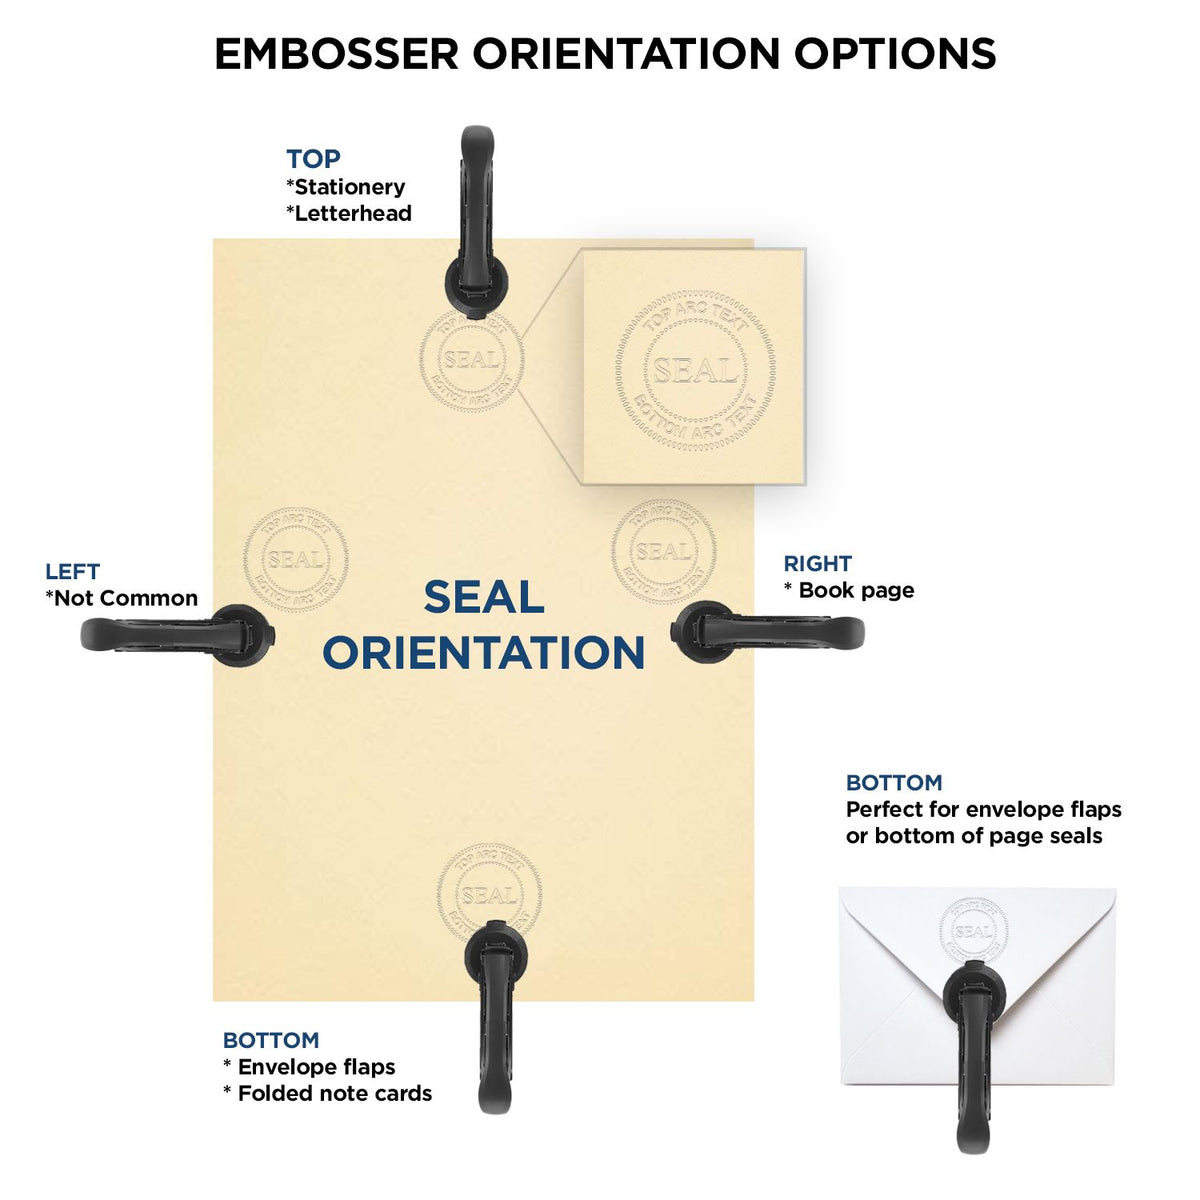 An infographic for the Gift Utah Land Surveyor Seal showing embosser orientation, this is showing examples of a top, bottom, right and left insert.